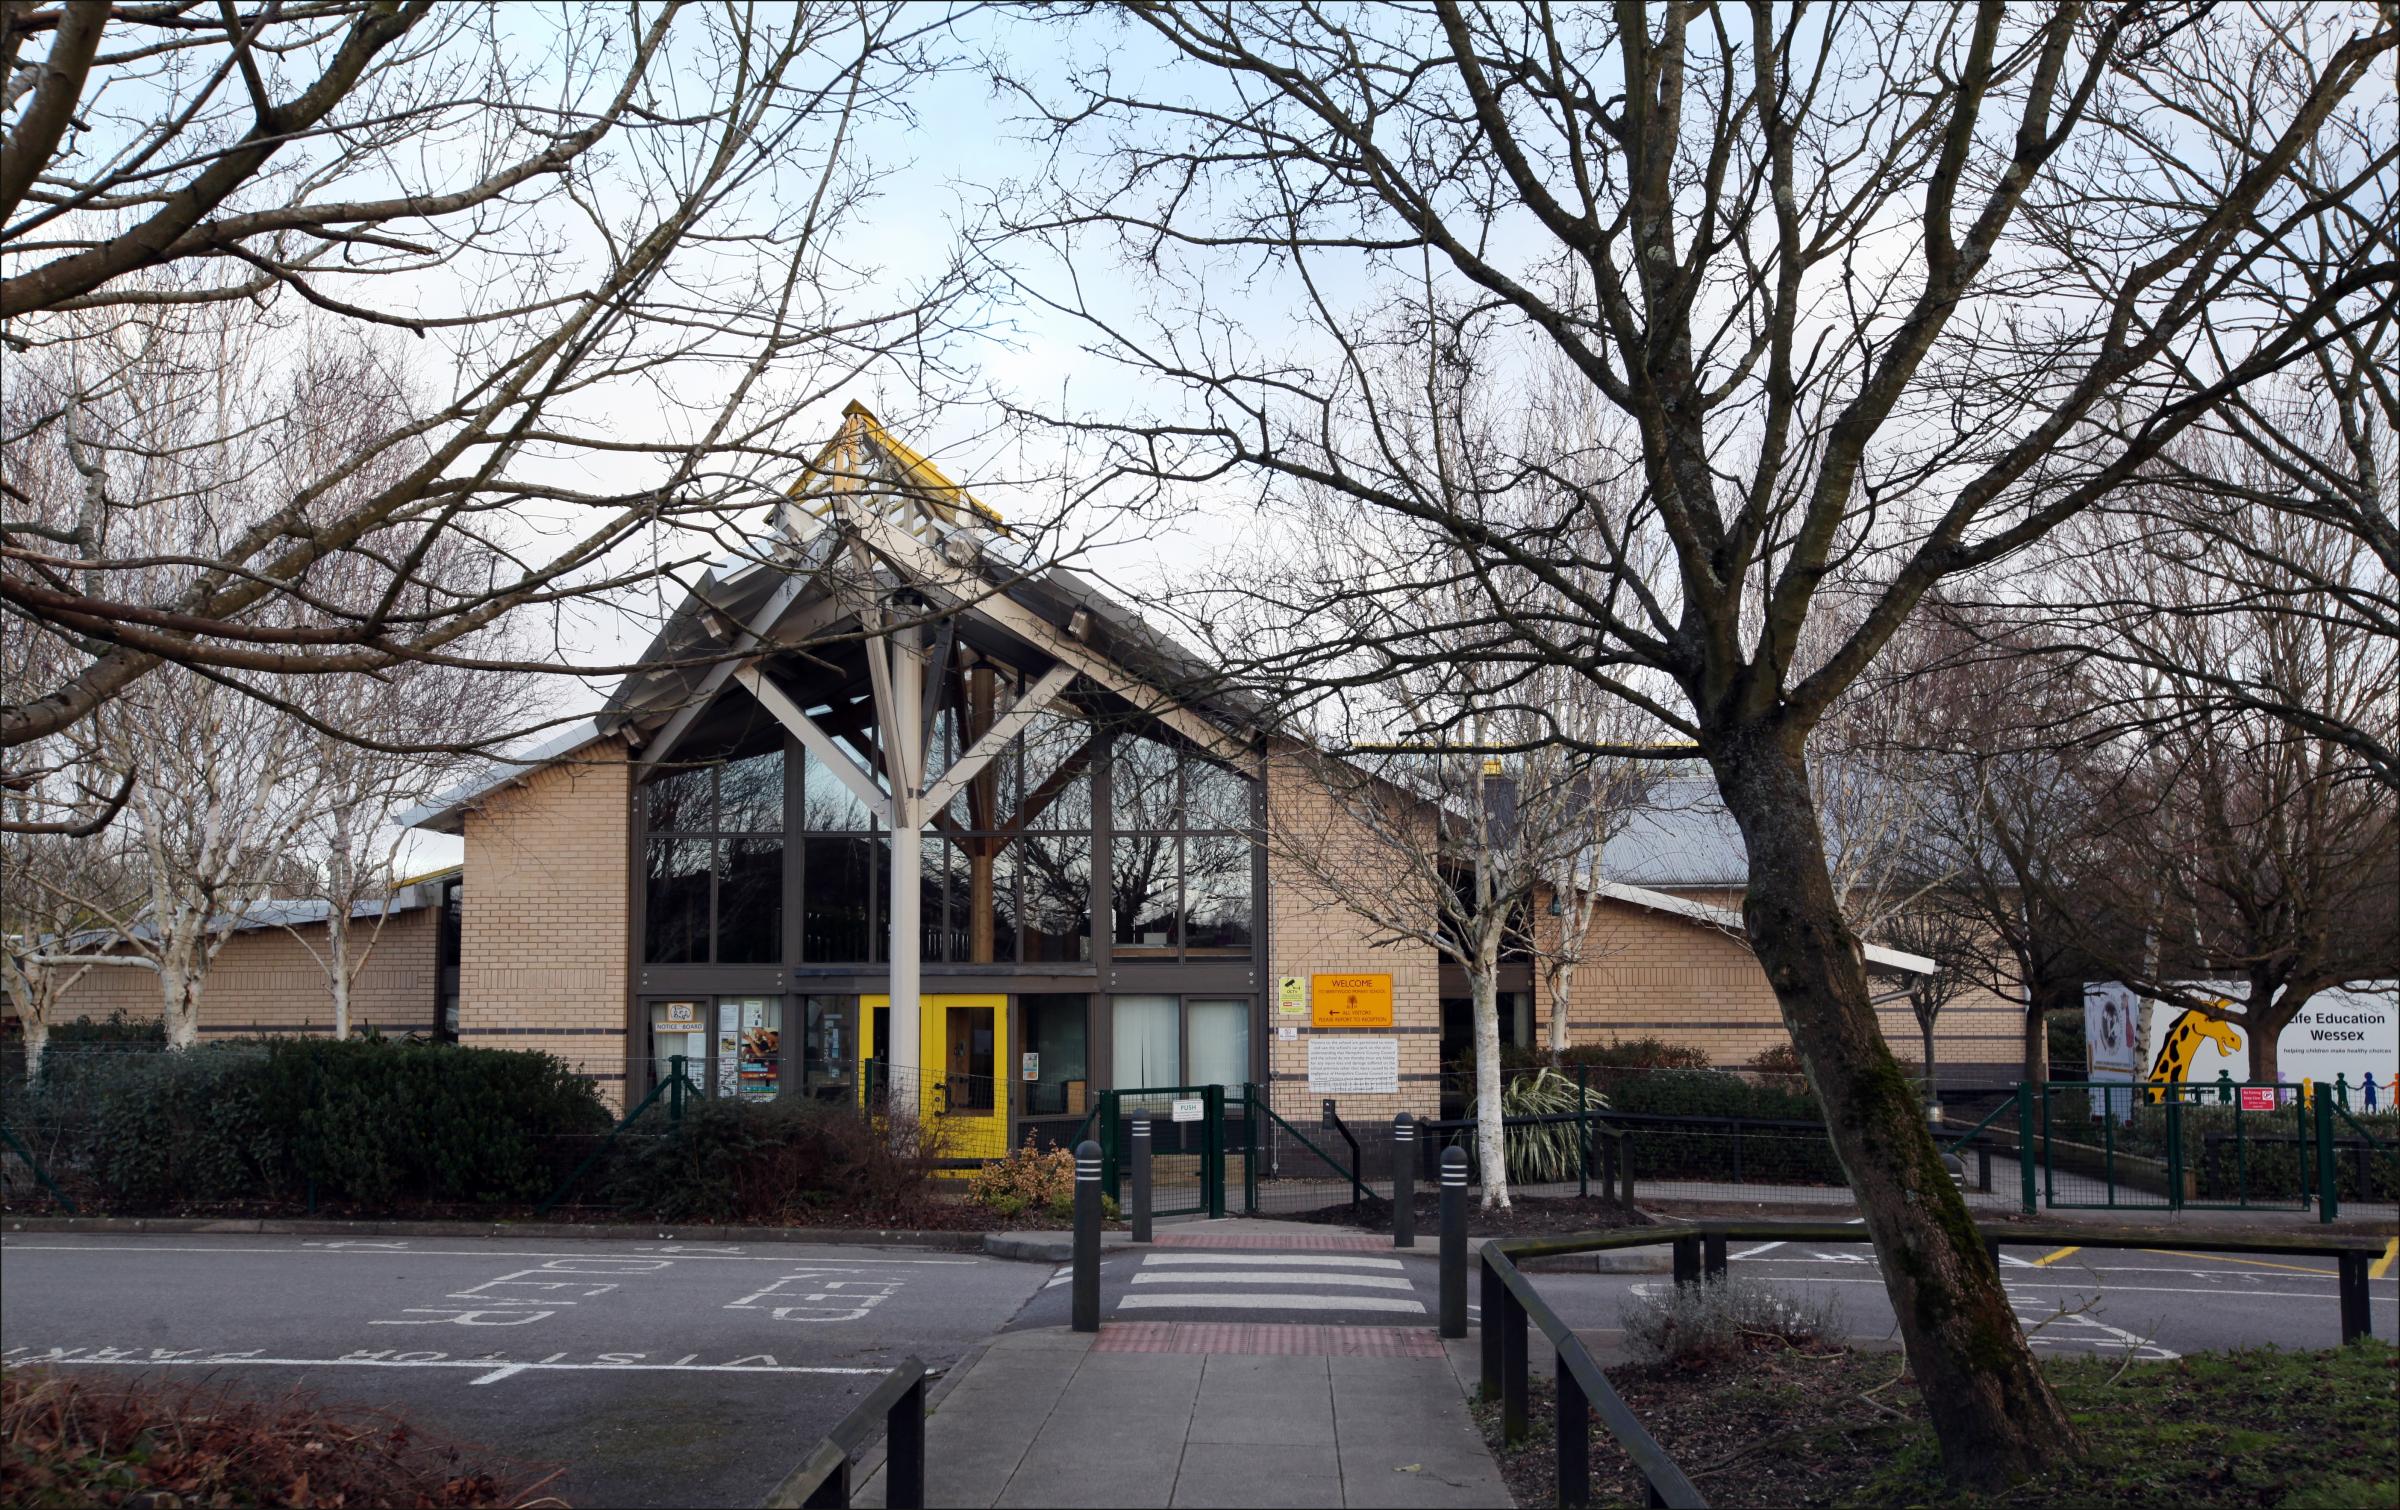 Headteacher's letter to parents following pupils suffering nightmares after watching Thriller